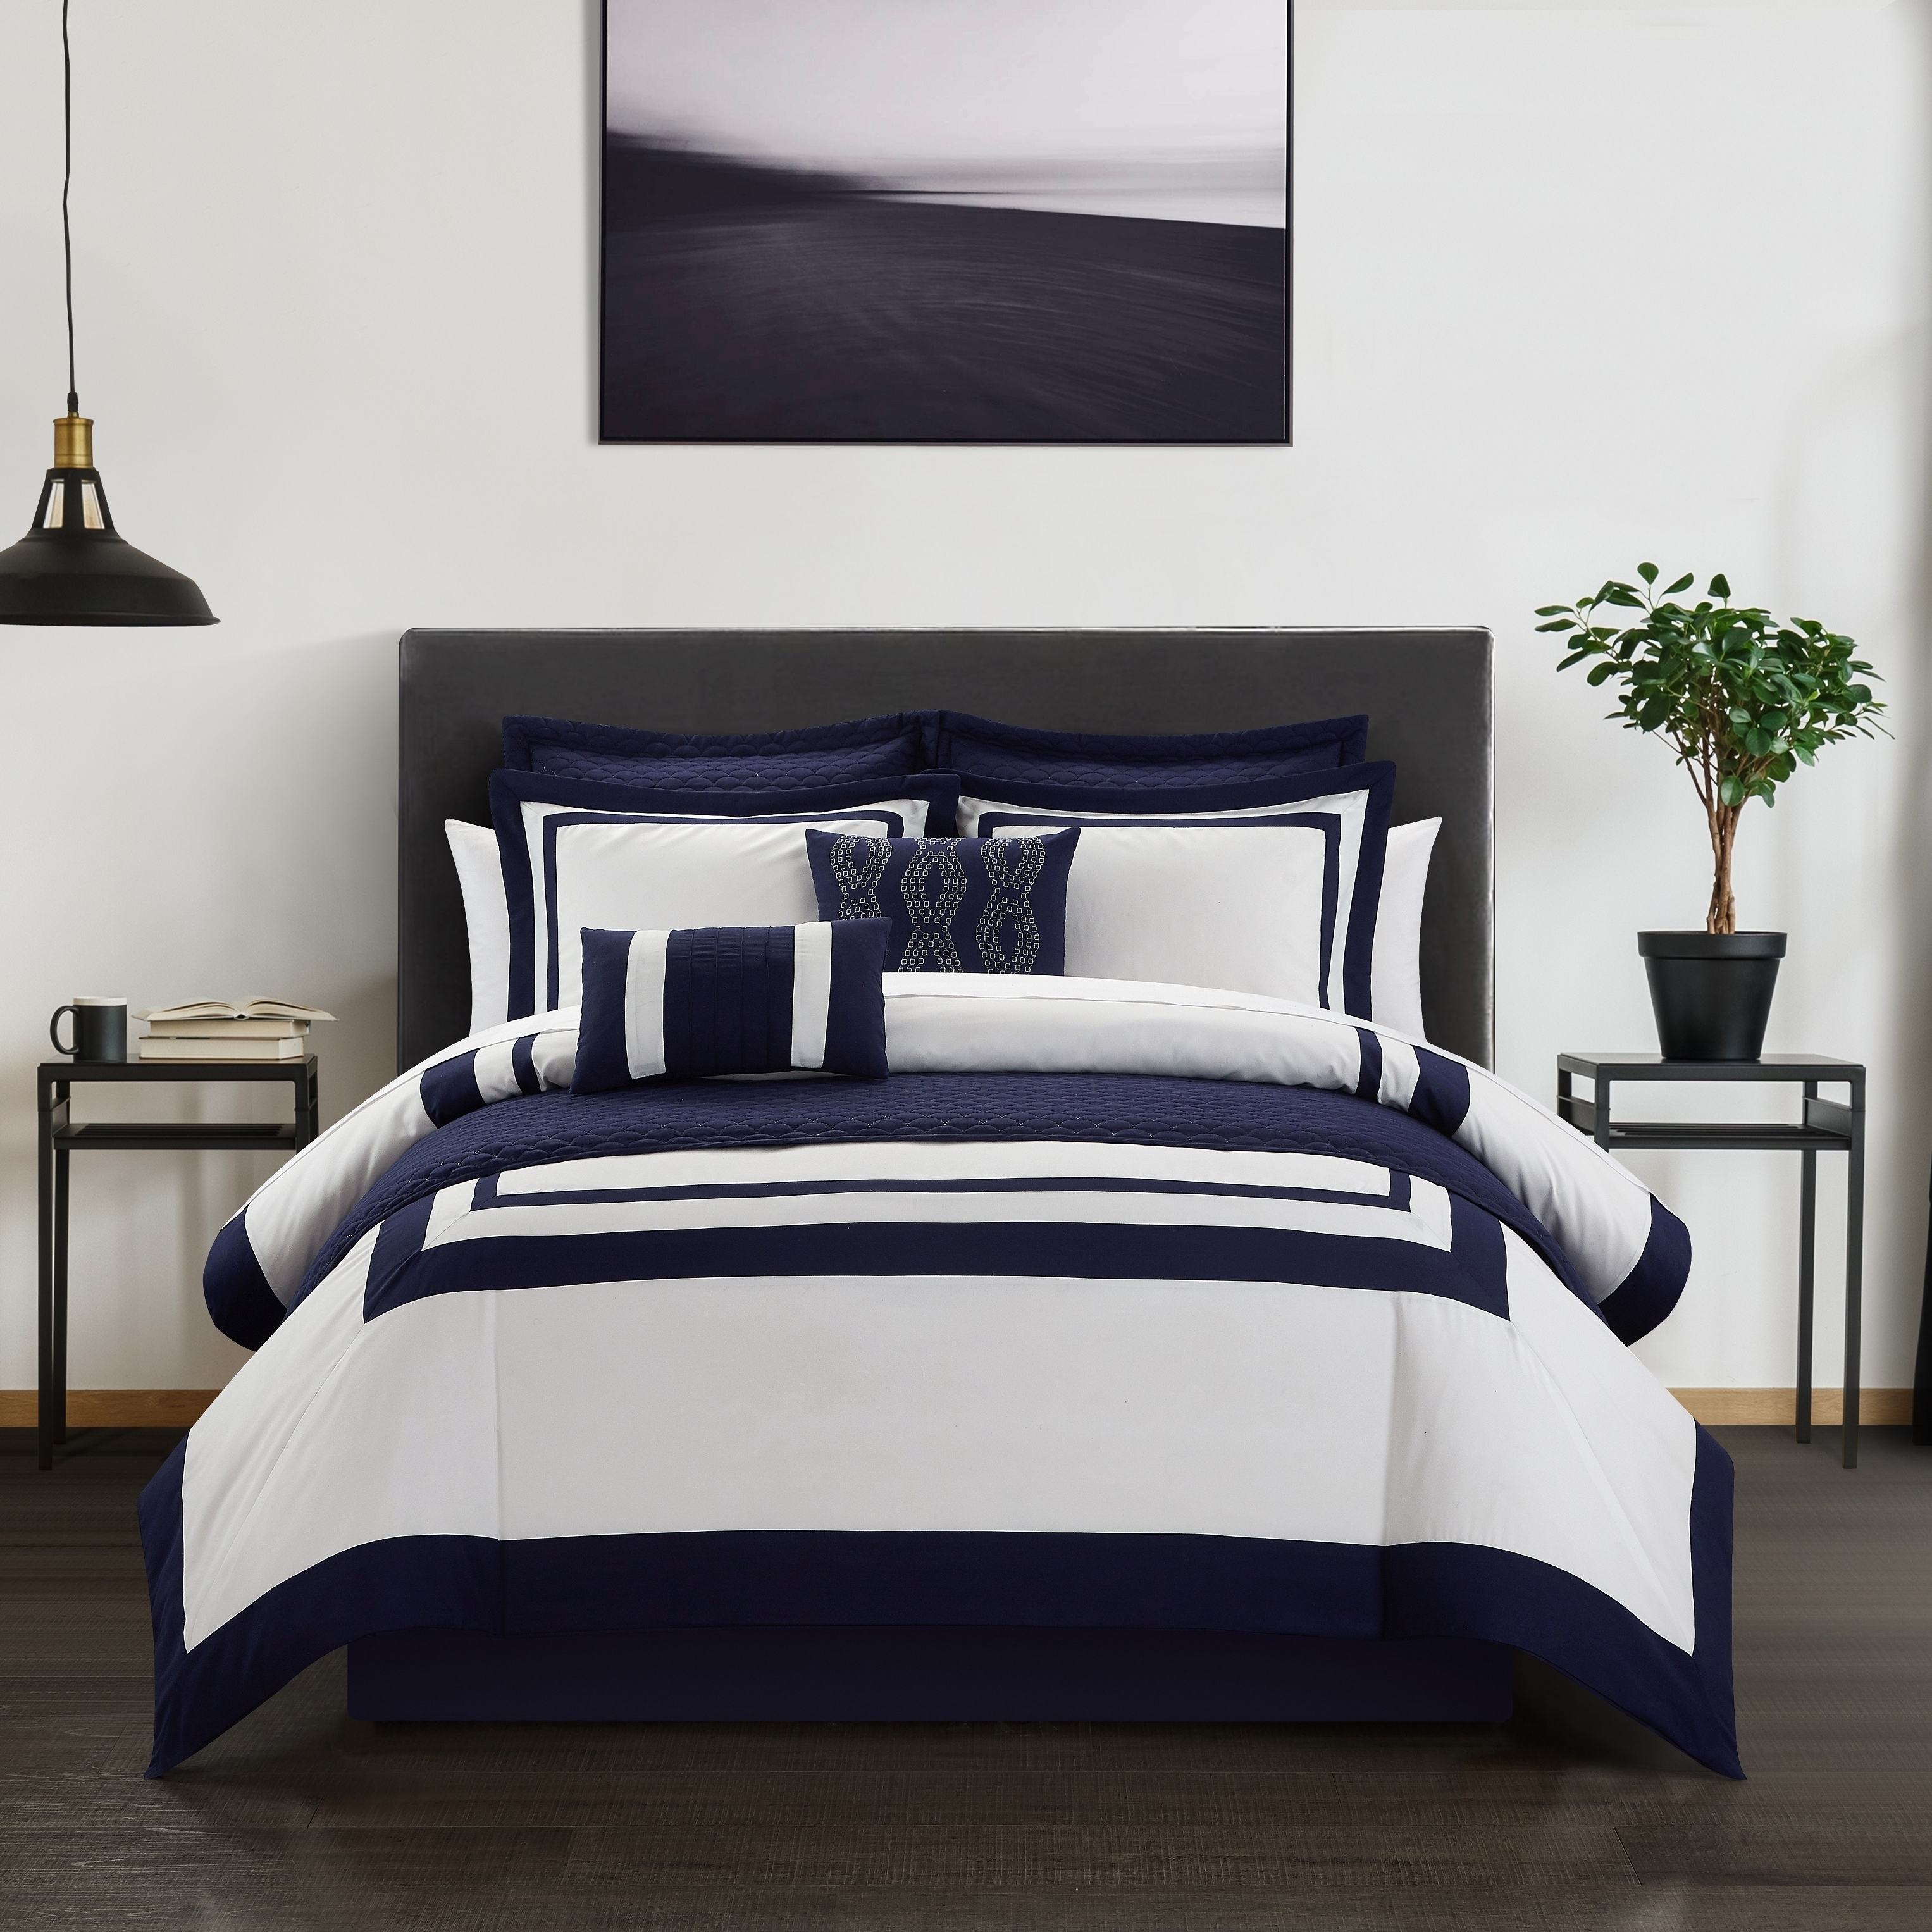 Hortense 8 Or 6 Piece Comforter And Quilt Set Hotel Collection - Navy, King - 8 Piece